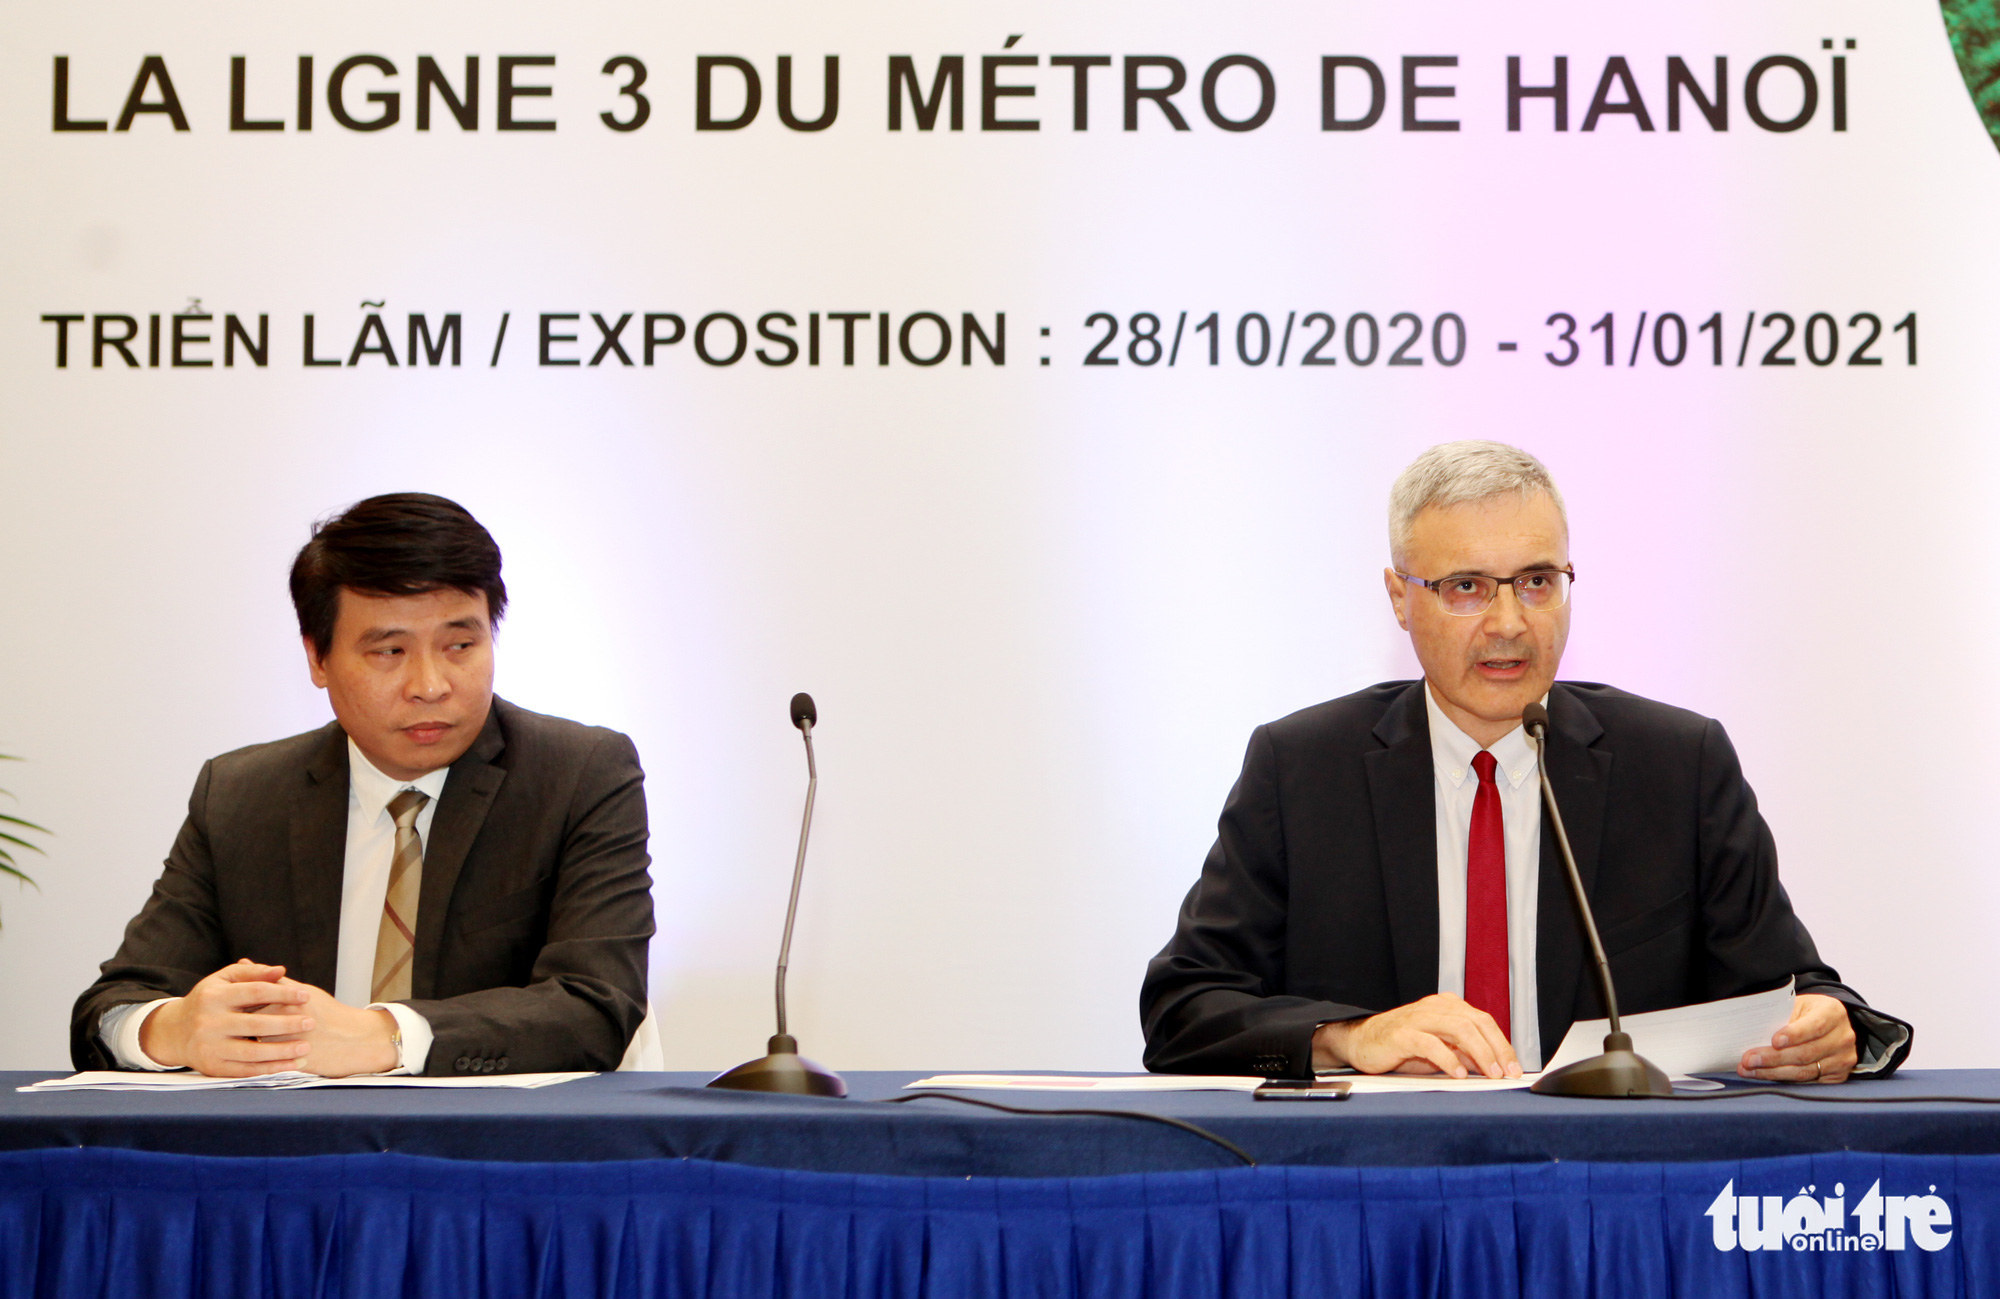 More French experts will arrive in Hanoi to assist metro line project: ambassador